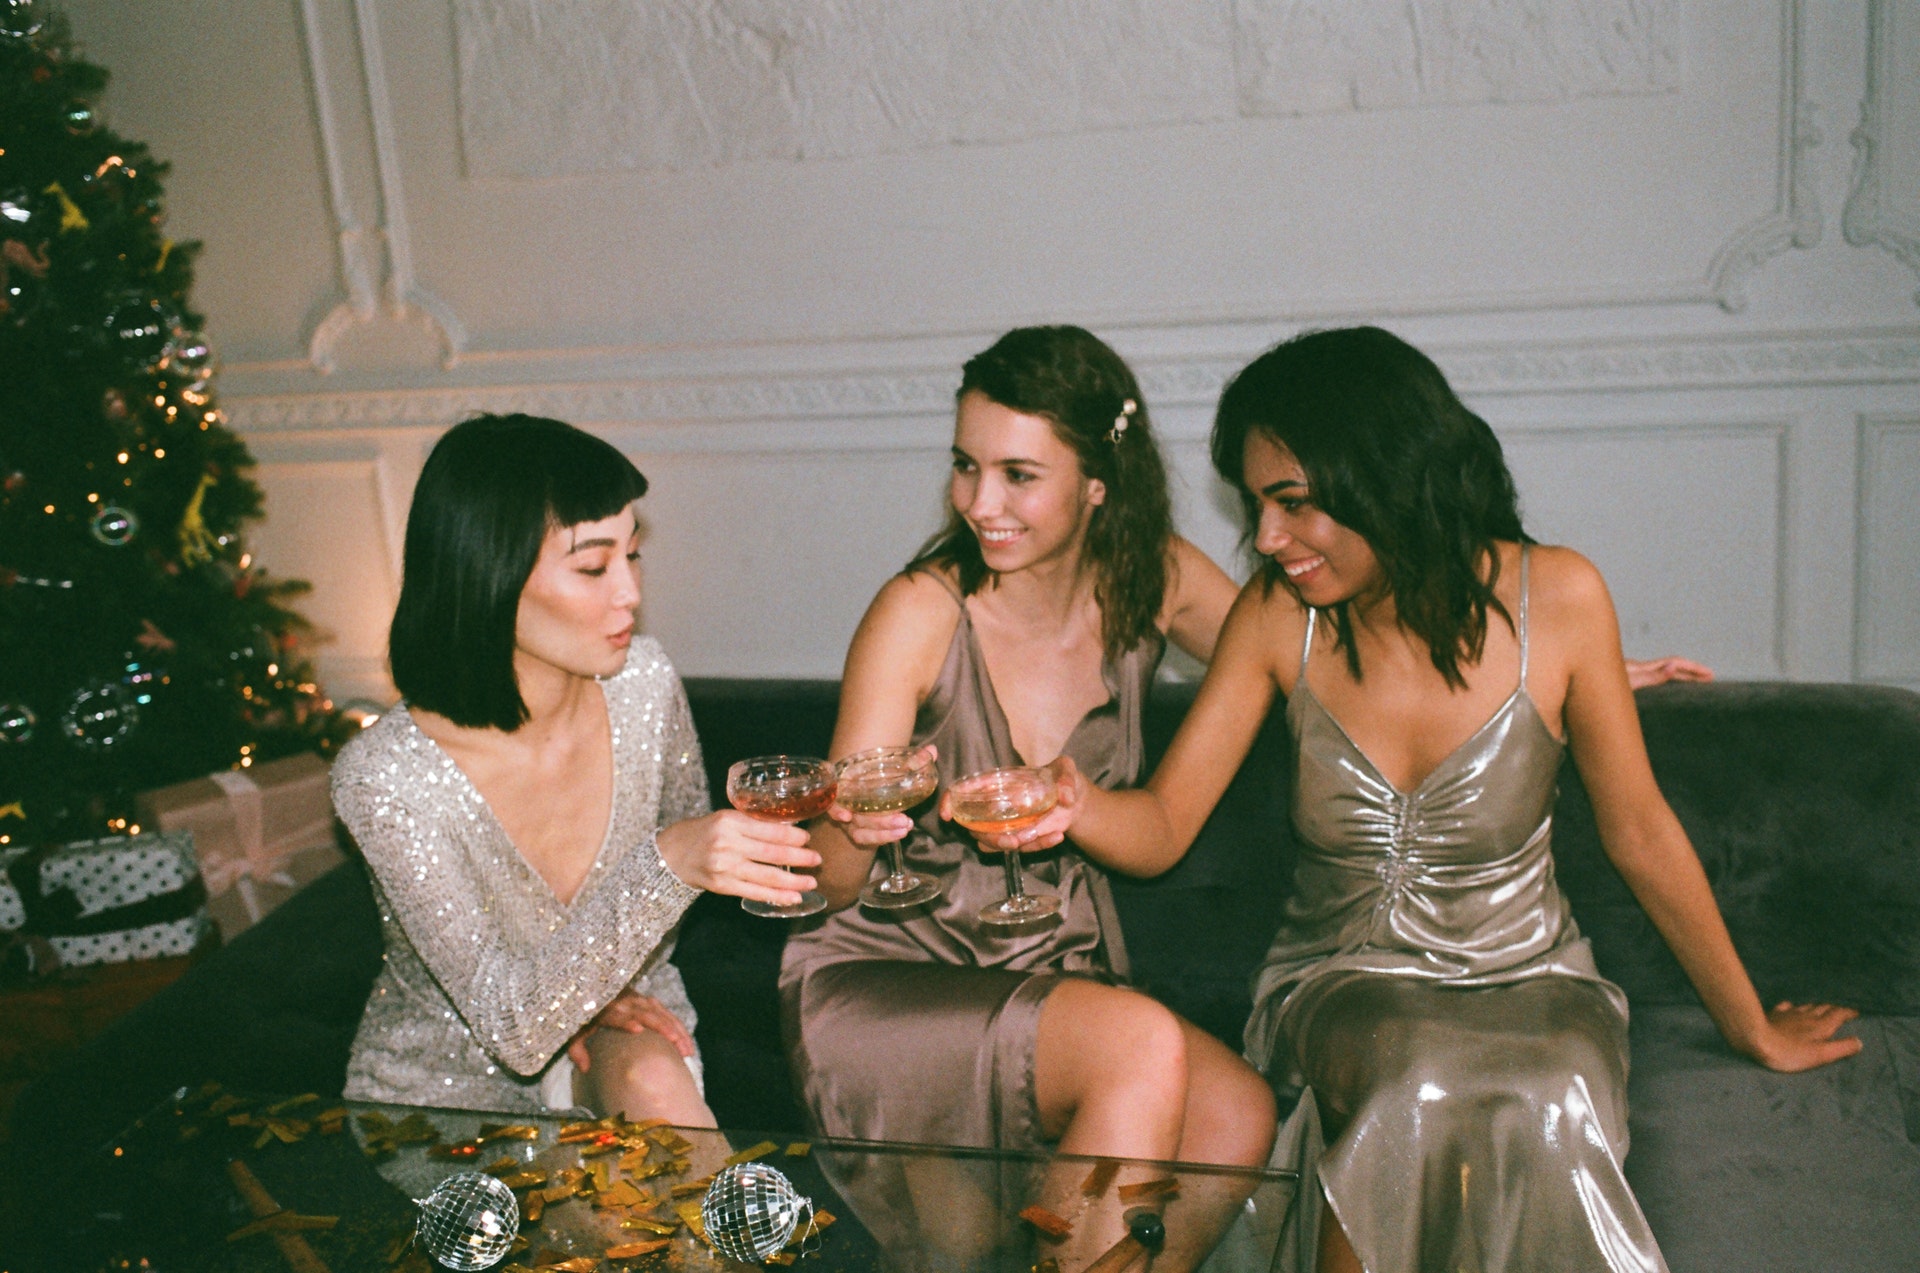 New Year's Eve Outfits, stylebooks and tips. Ph. Inga Seliverstova, Pexels